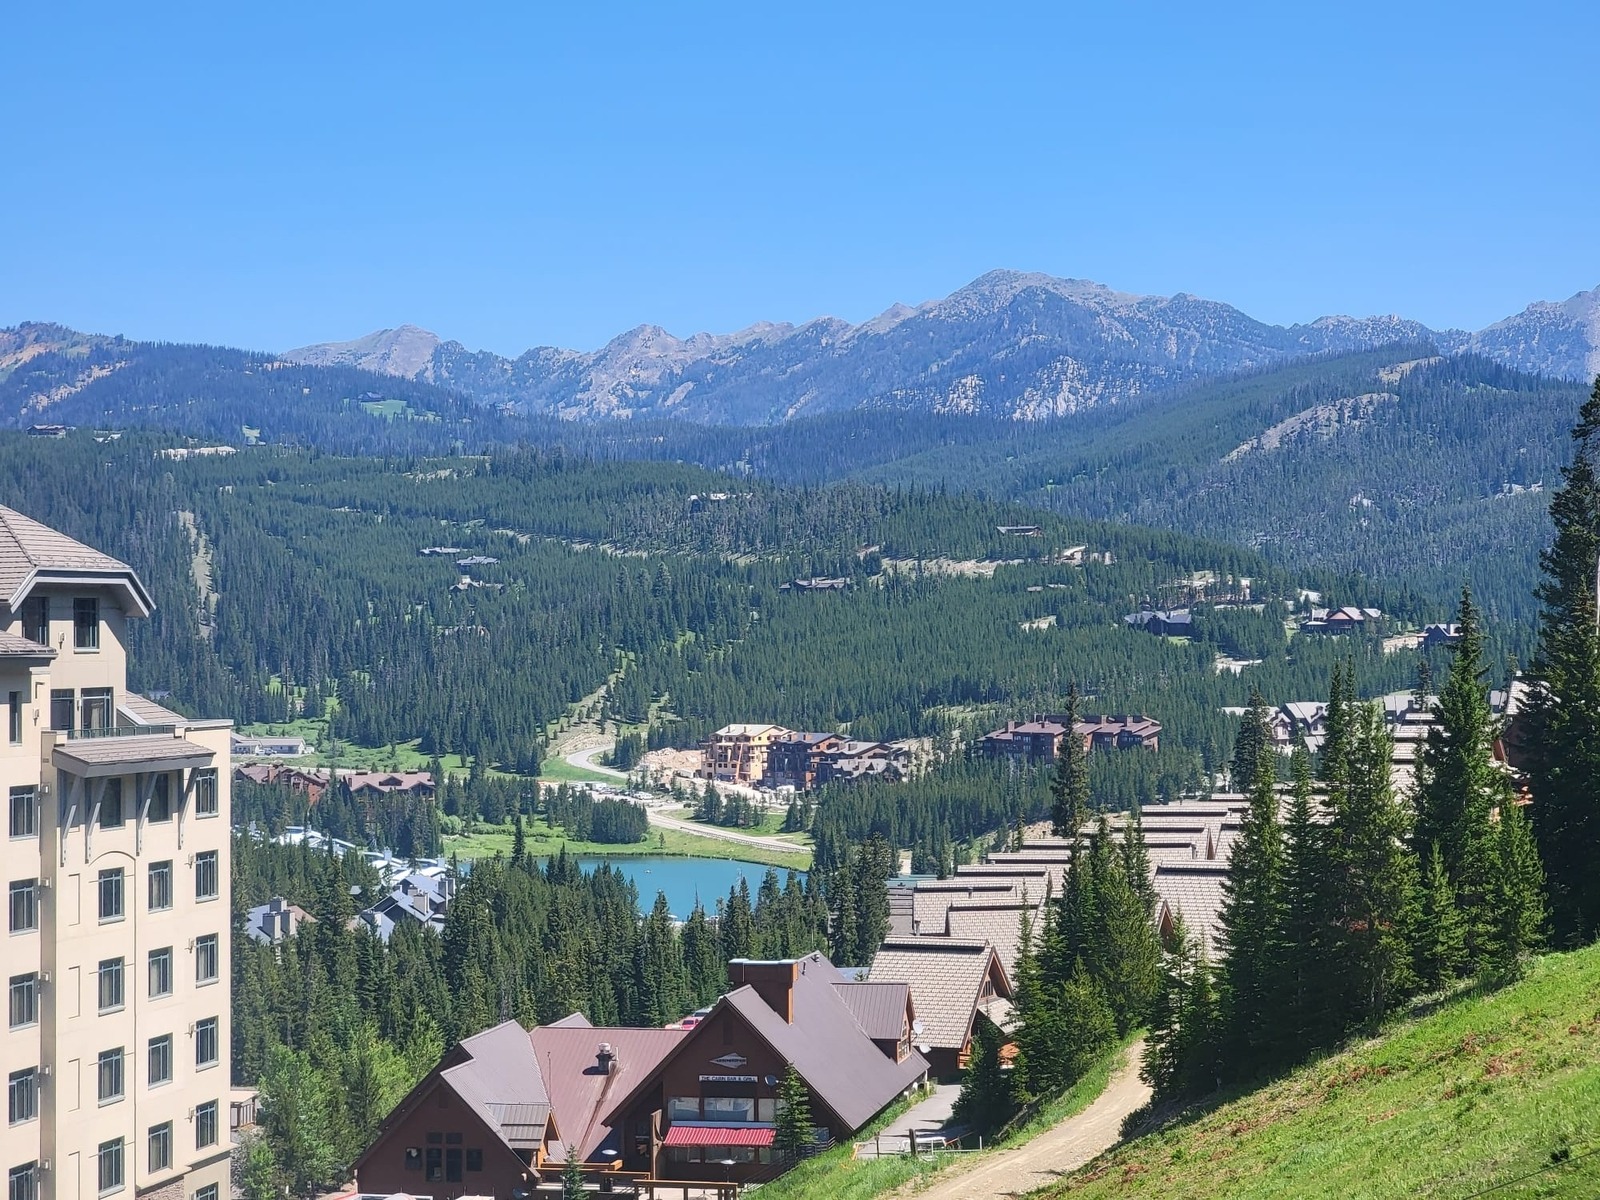 The view from Big Sky Resort looking north at the Mountain Village and beyond to the Spanish Peaks. July 2022. Photo by Dr. Mohammad Shamsuddoha, Western Illinois University